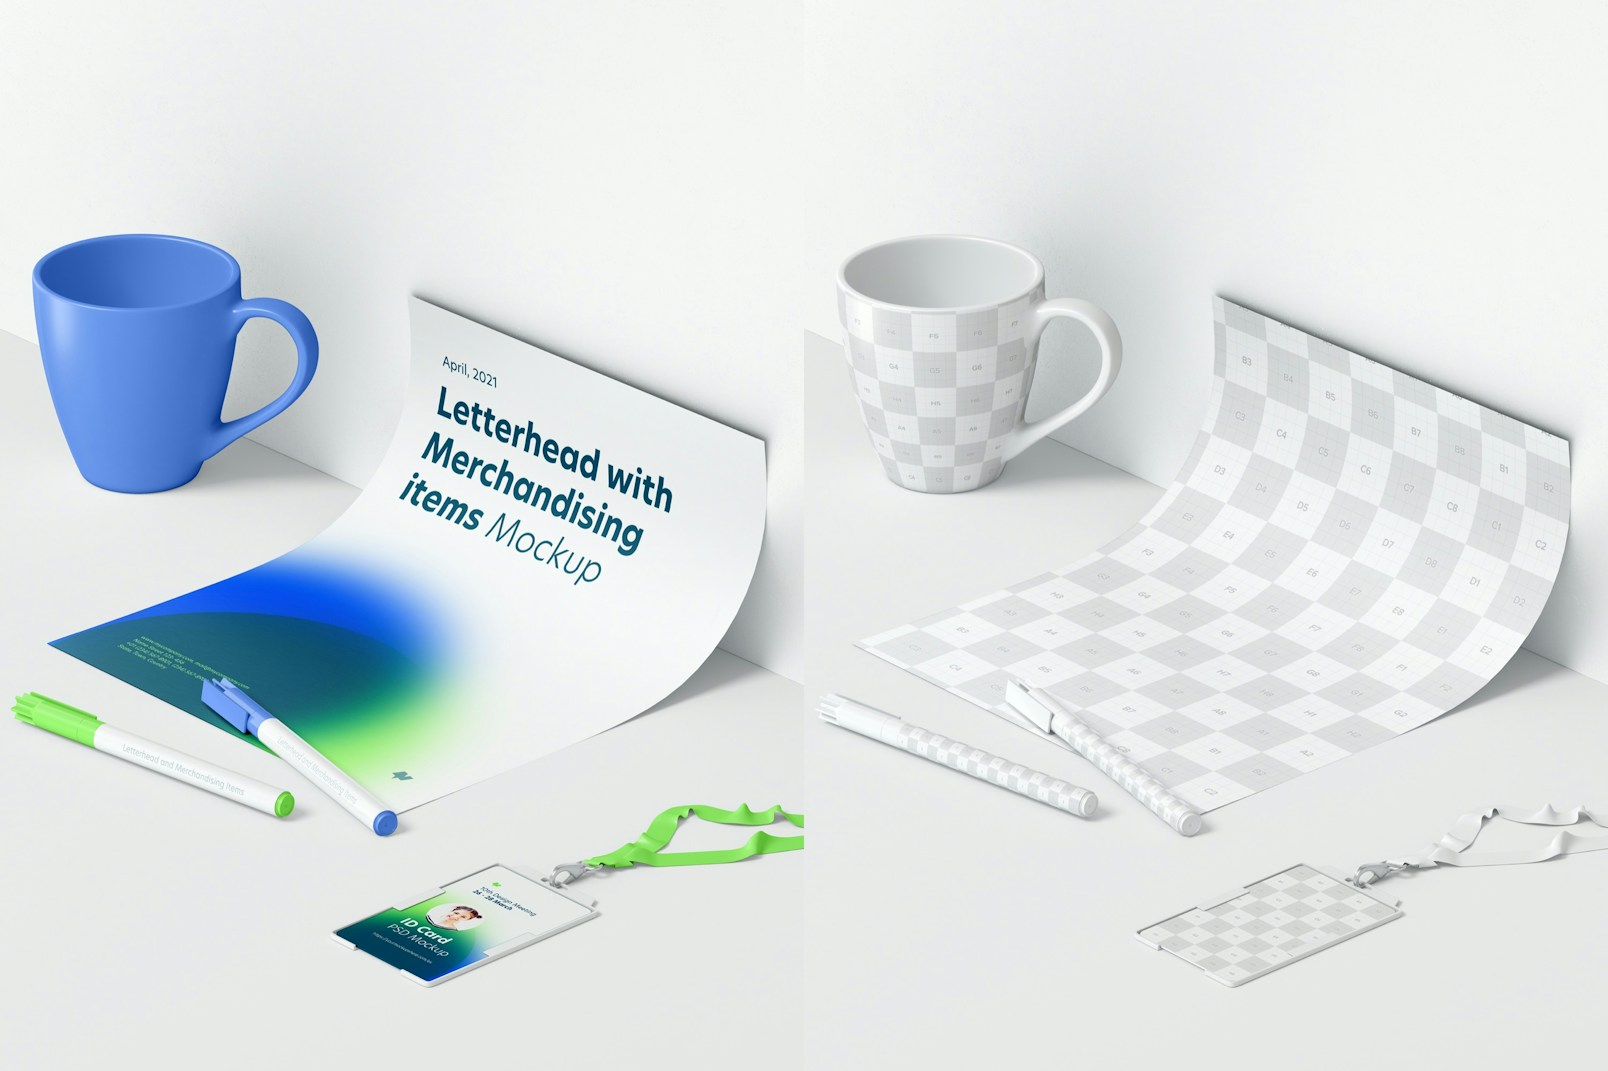 Letterhead and Merchandising Items Mockup, Perspective View